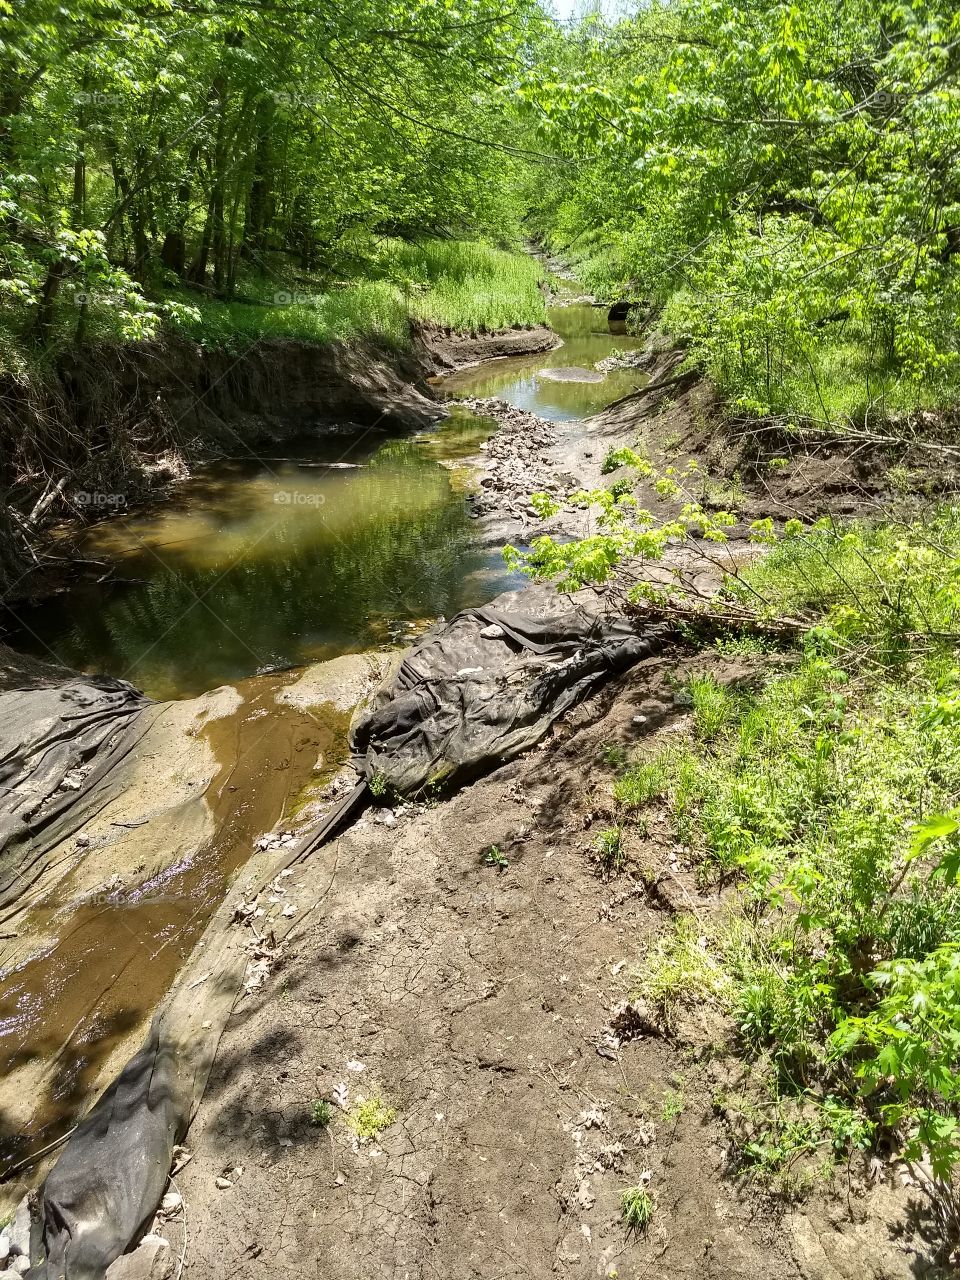 Creek, a tributary to the Missouri River.